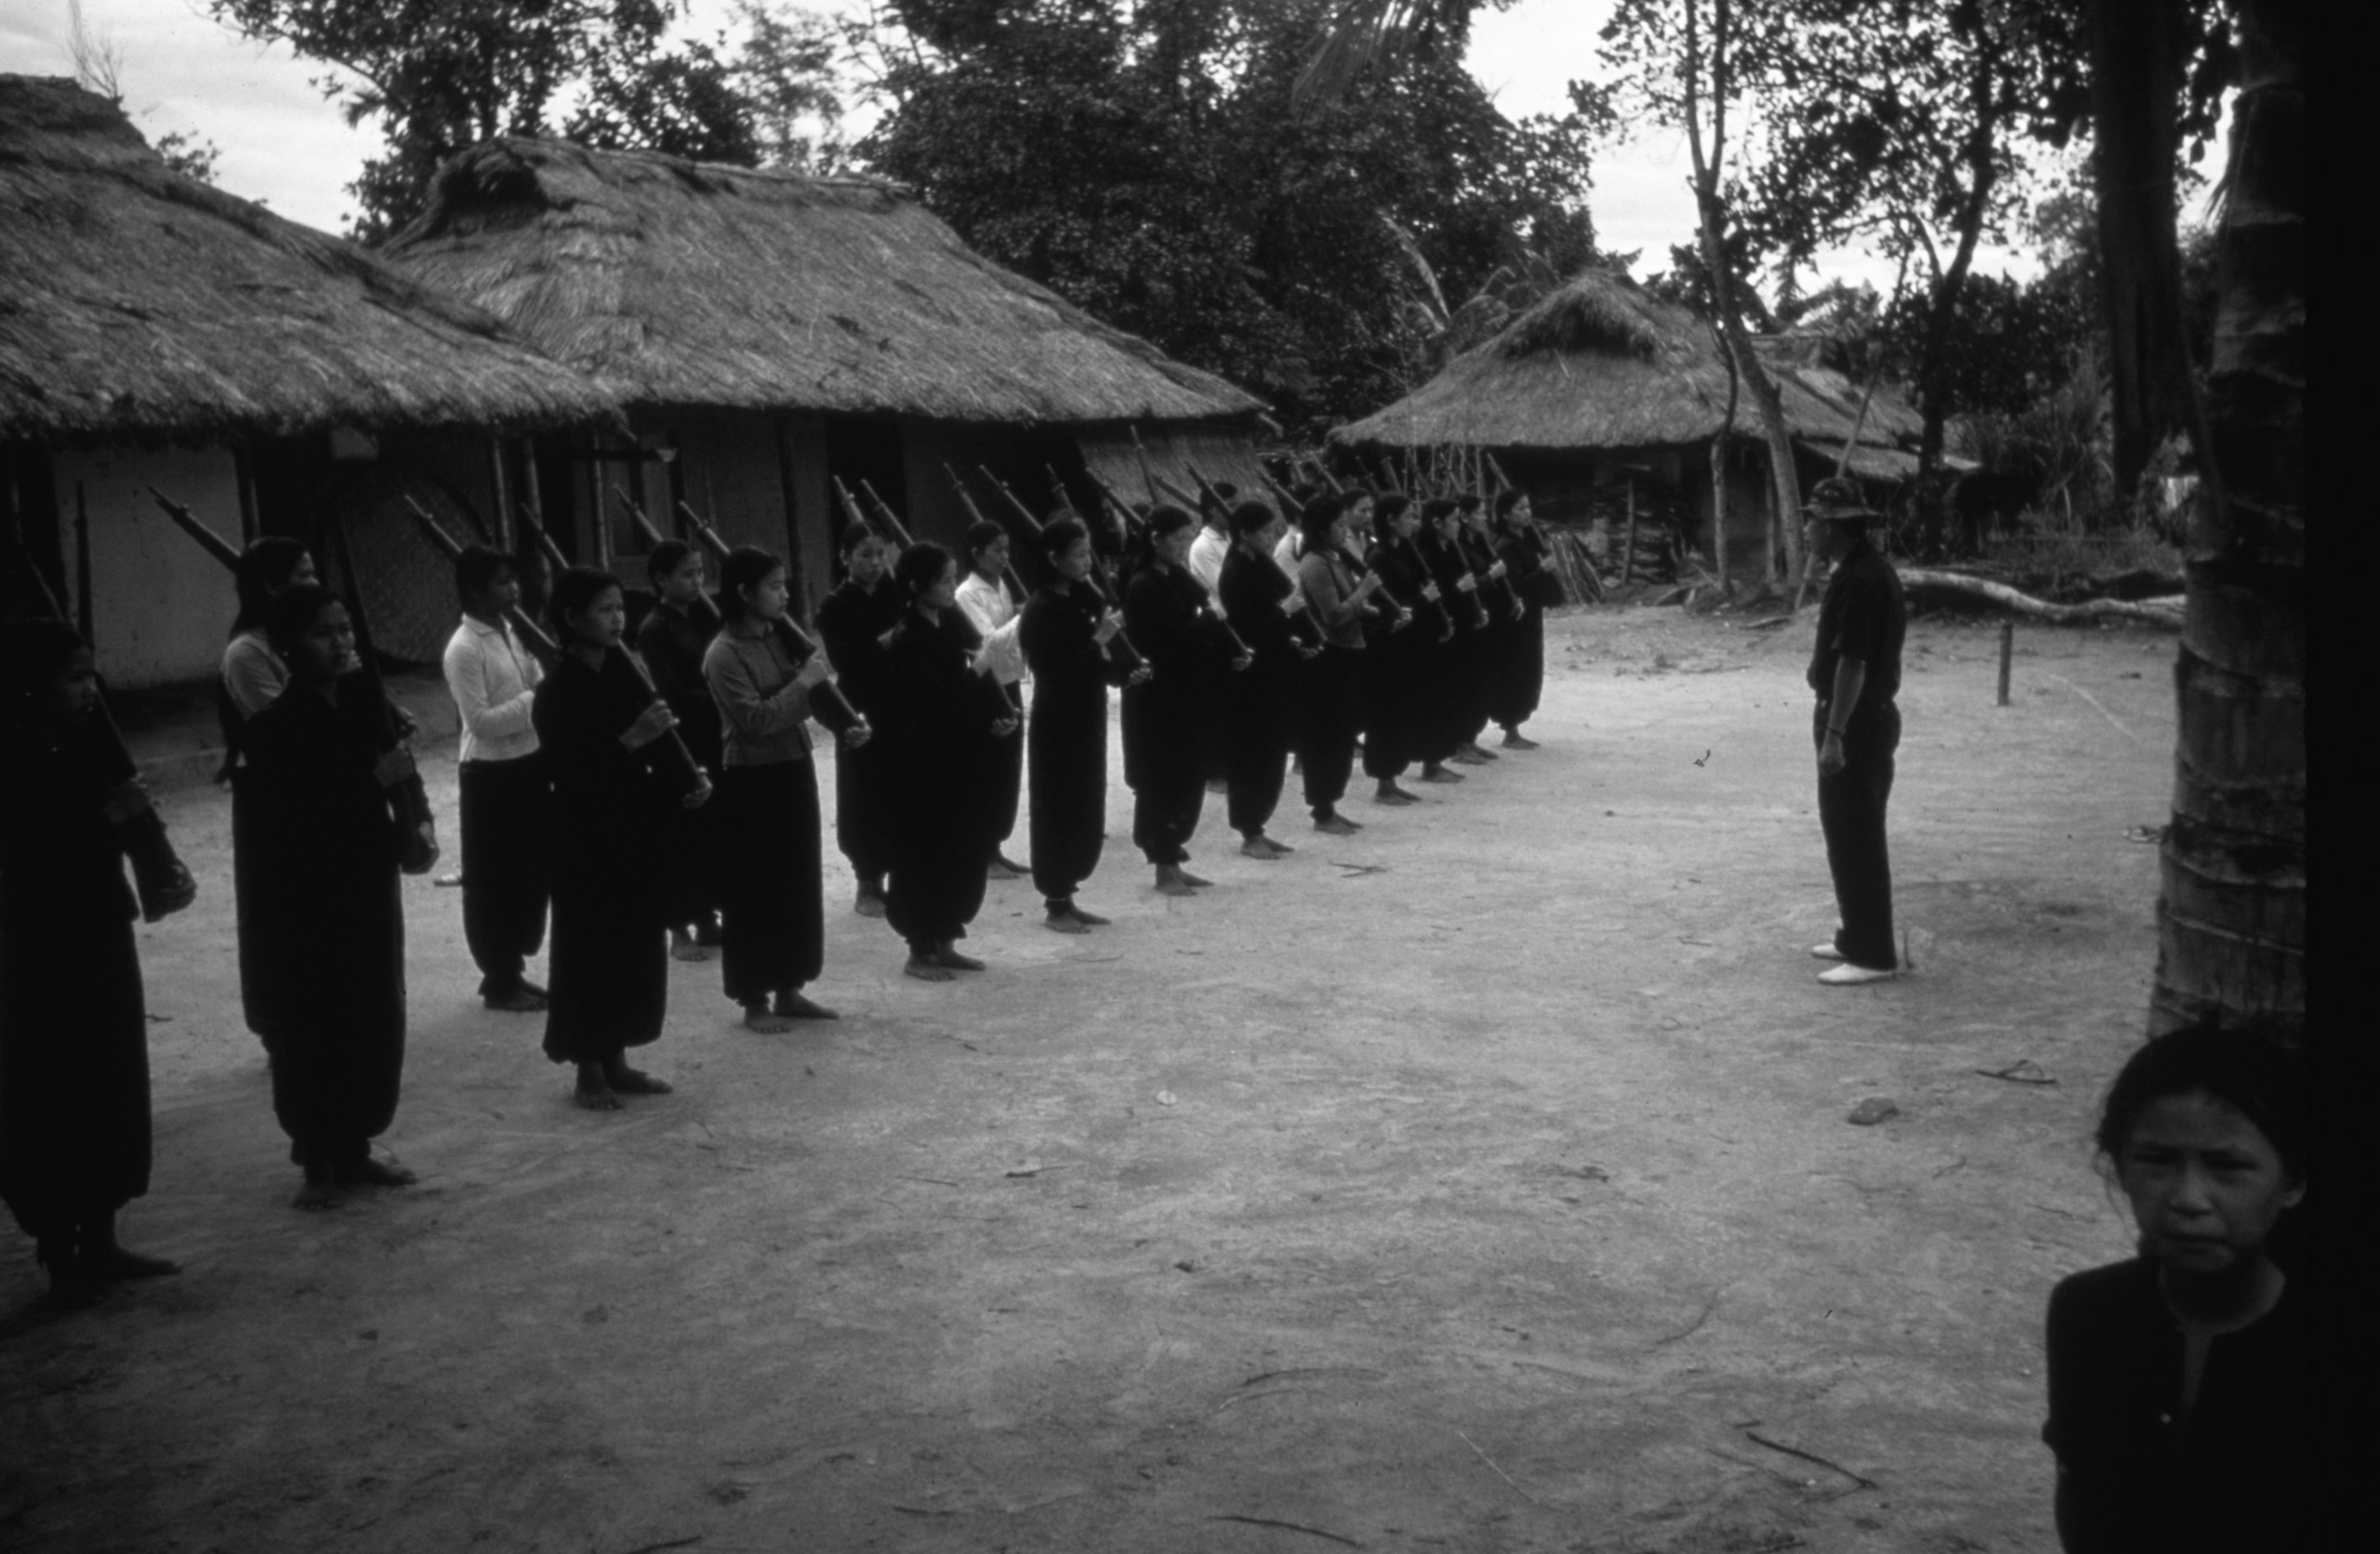 A group of Vietnamese women train with rifles in a village near the Laotian border, ca. 1962.